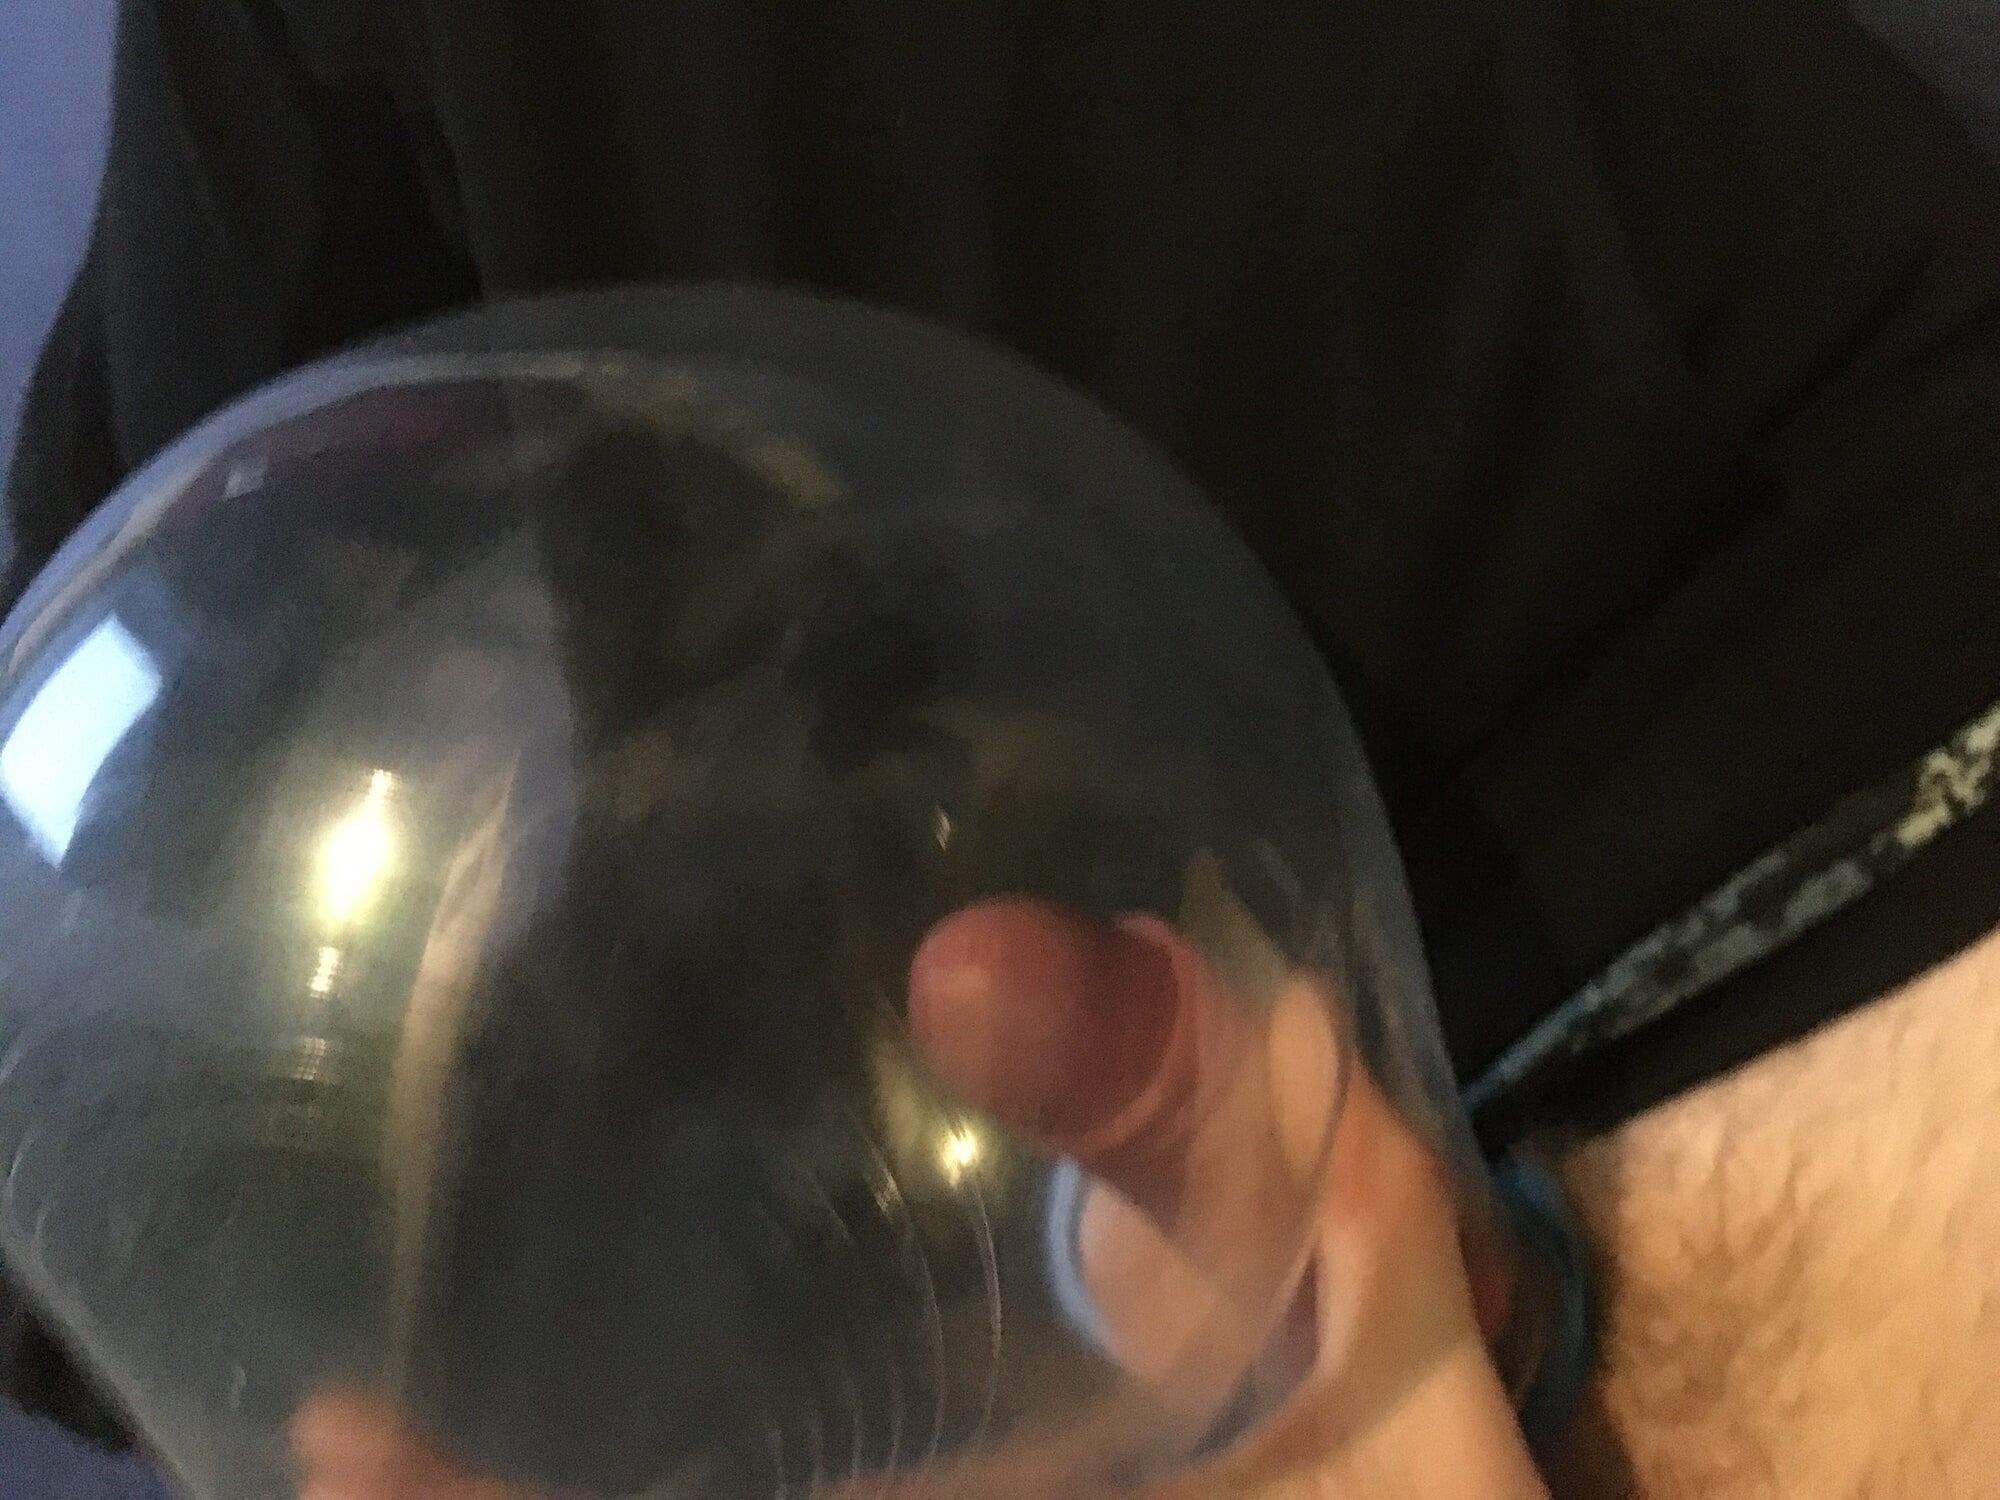  Haired Dick And Balls With Rubber Bands Condom Ballon  fuck #25